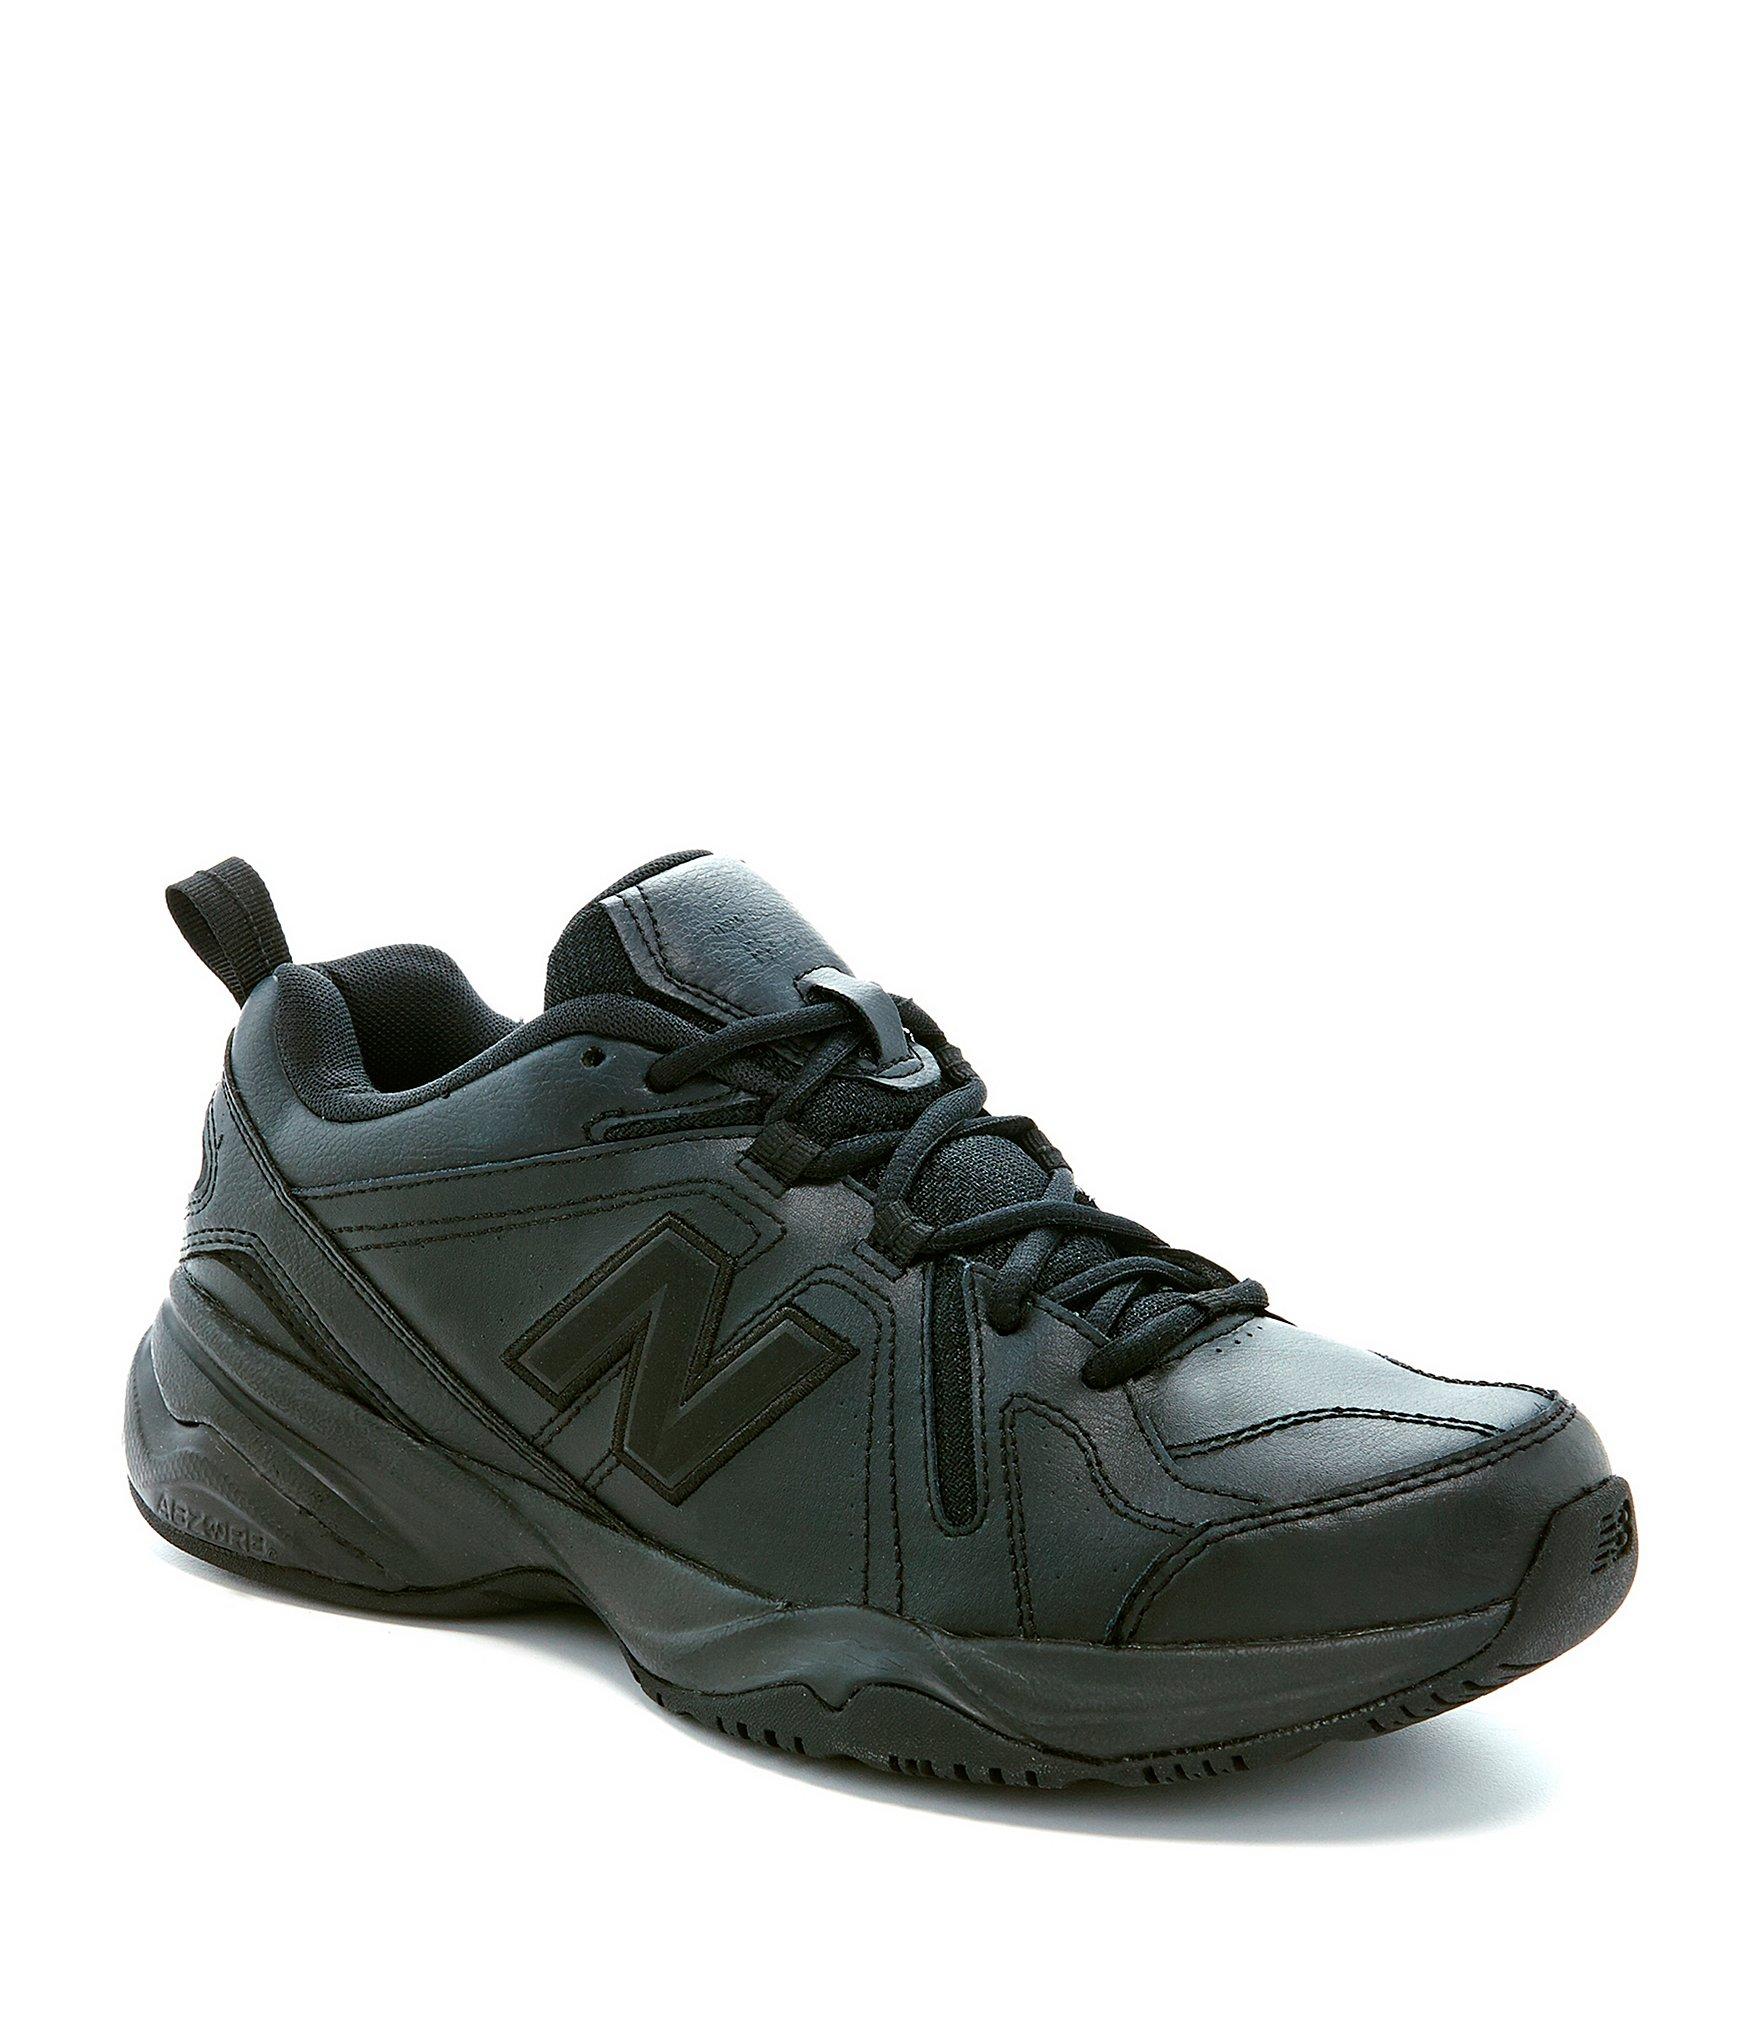 New Balance Leather 608 V4 Training Shoes in Black for Men - Lyst